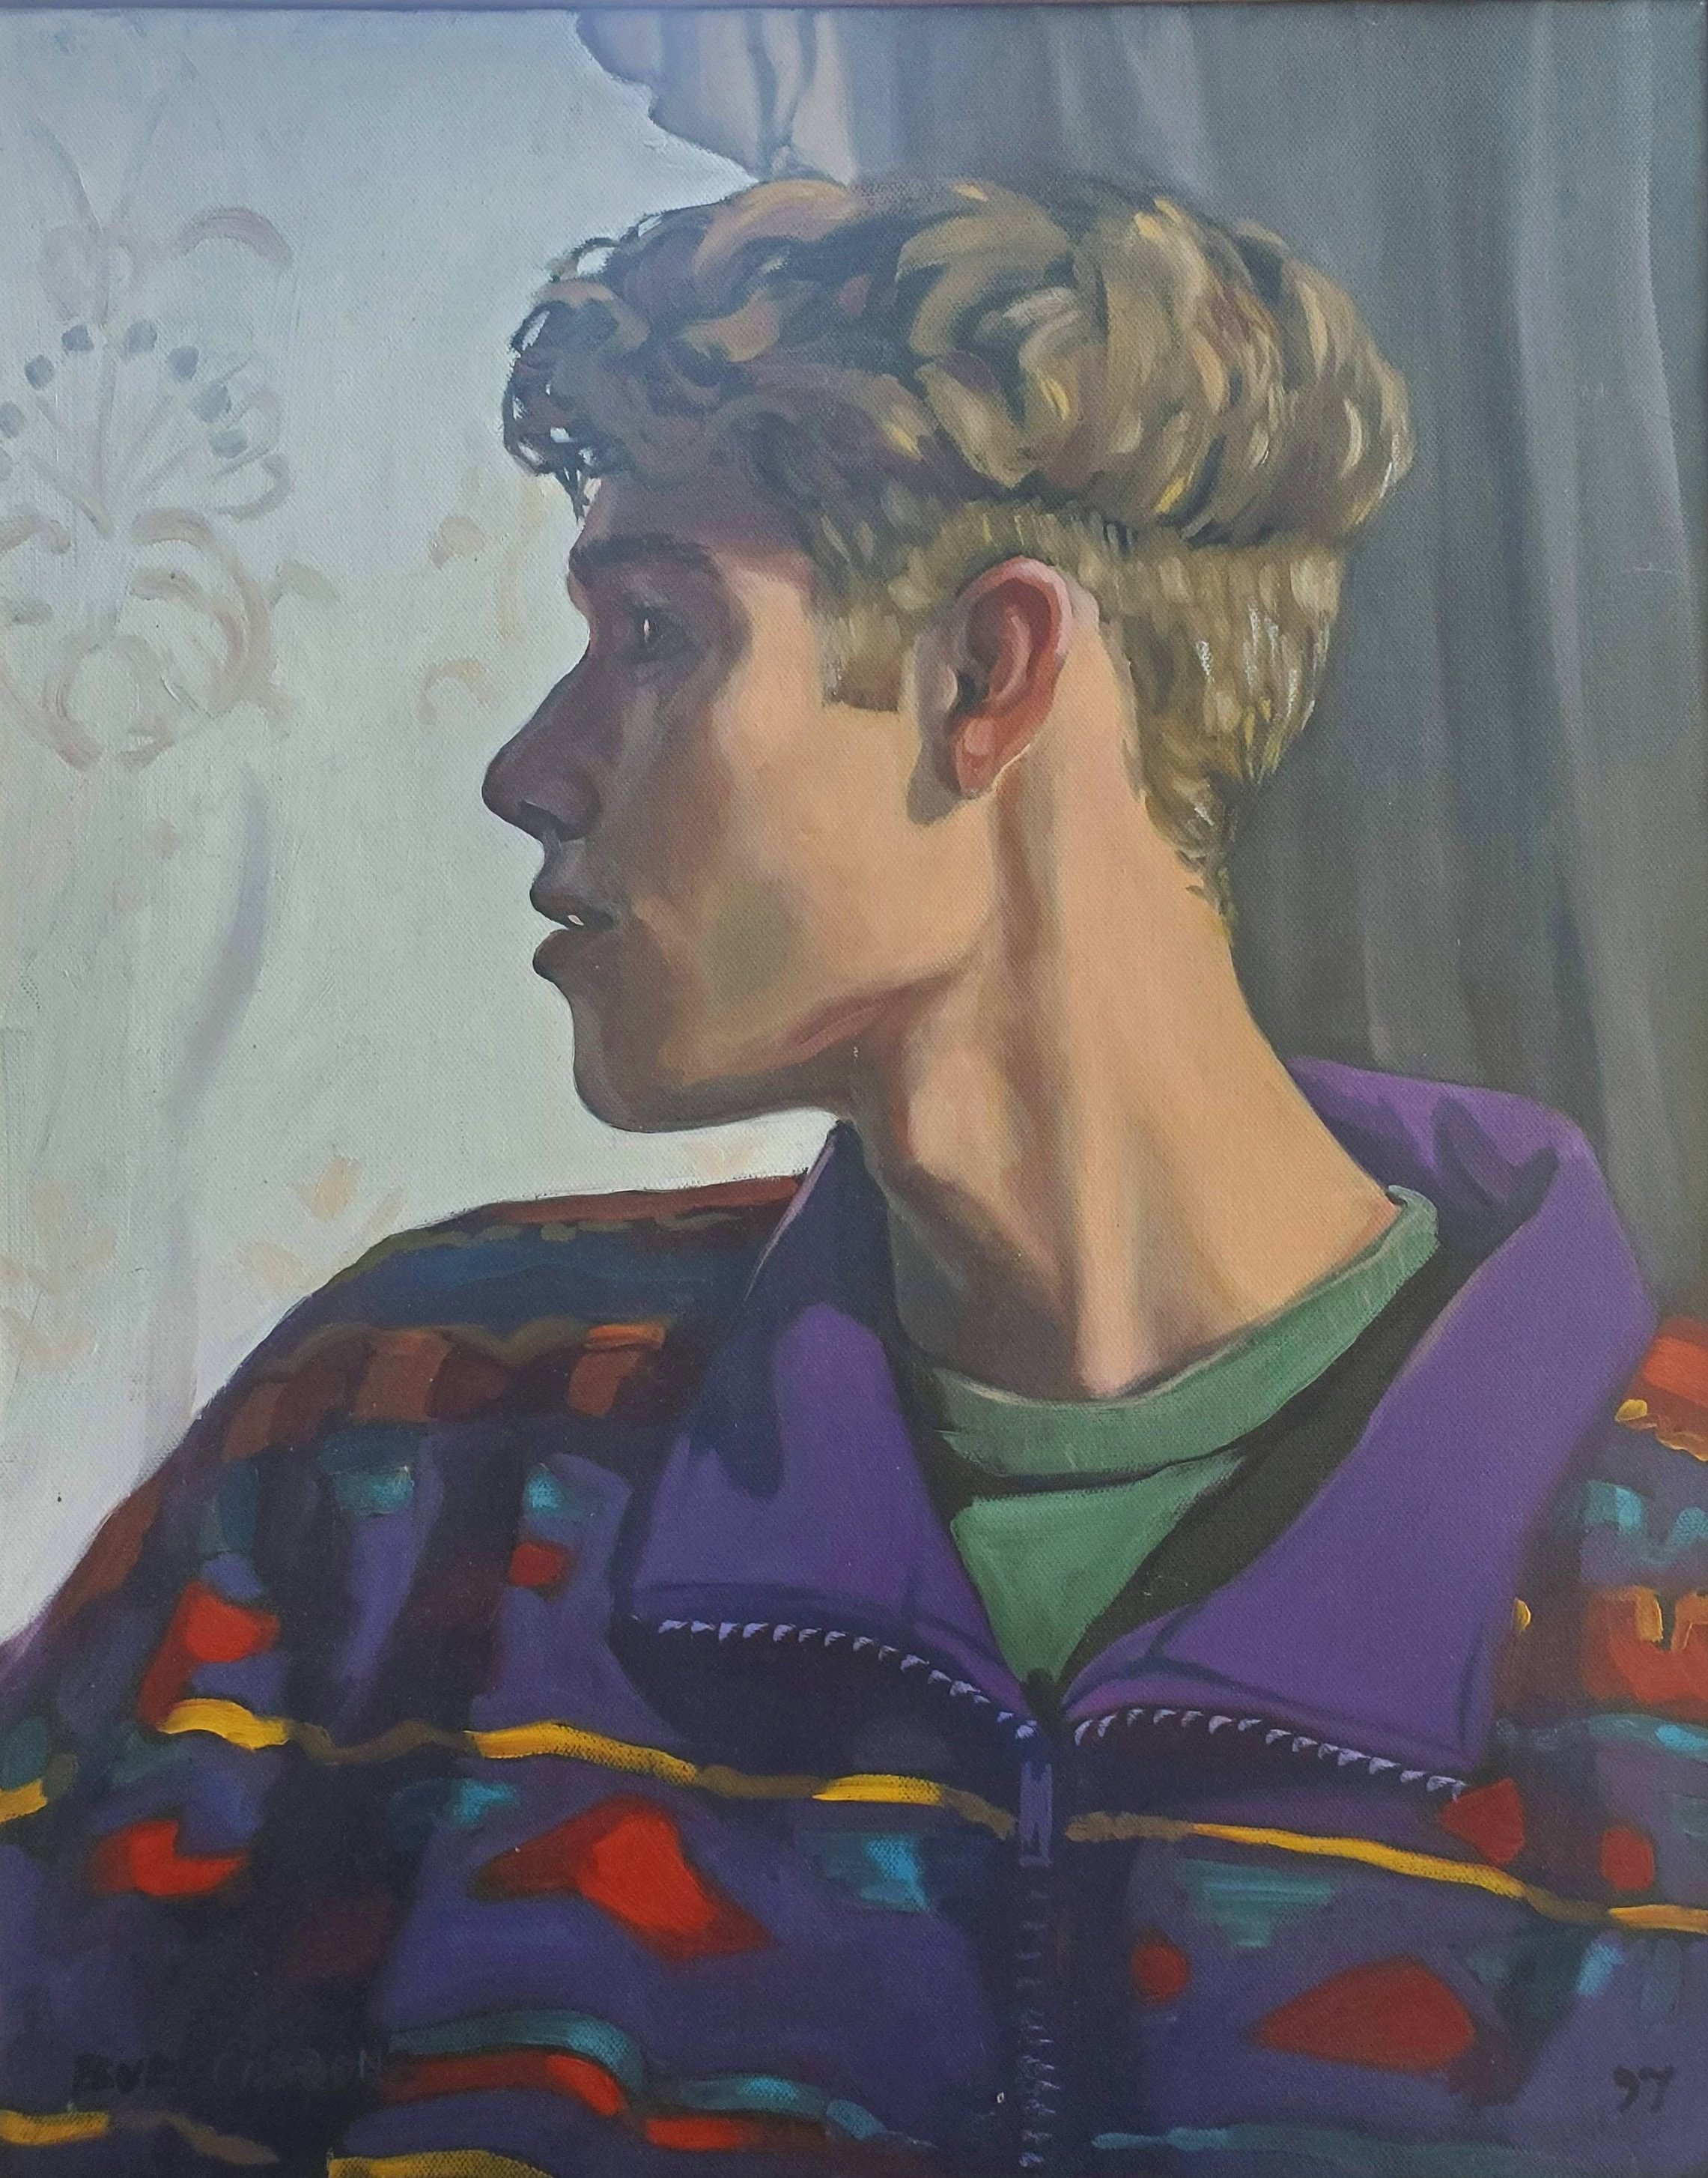 Charlie at 18 (The Artist's Son)